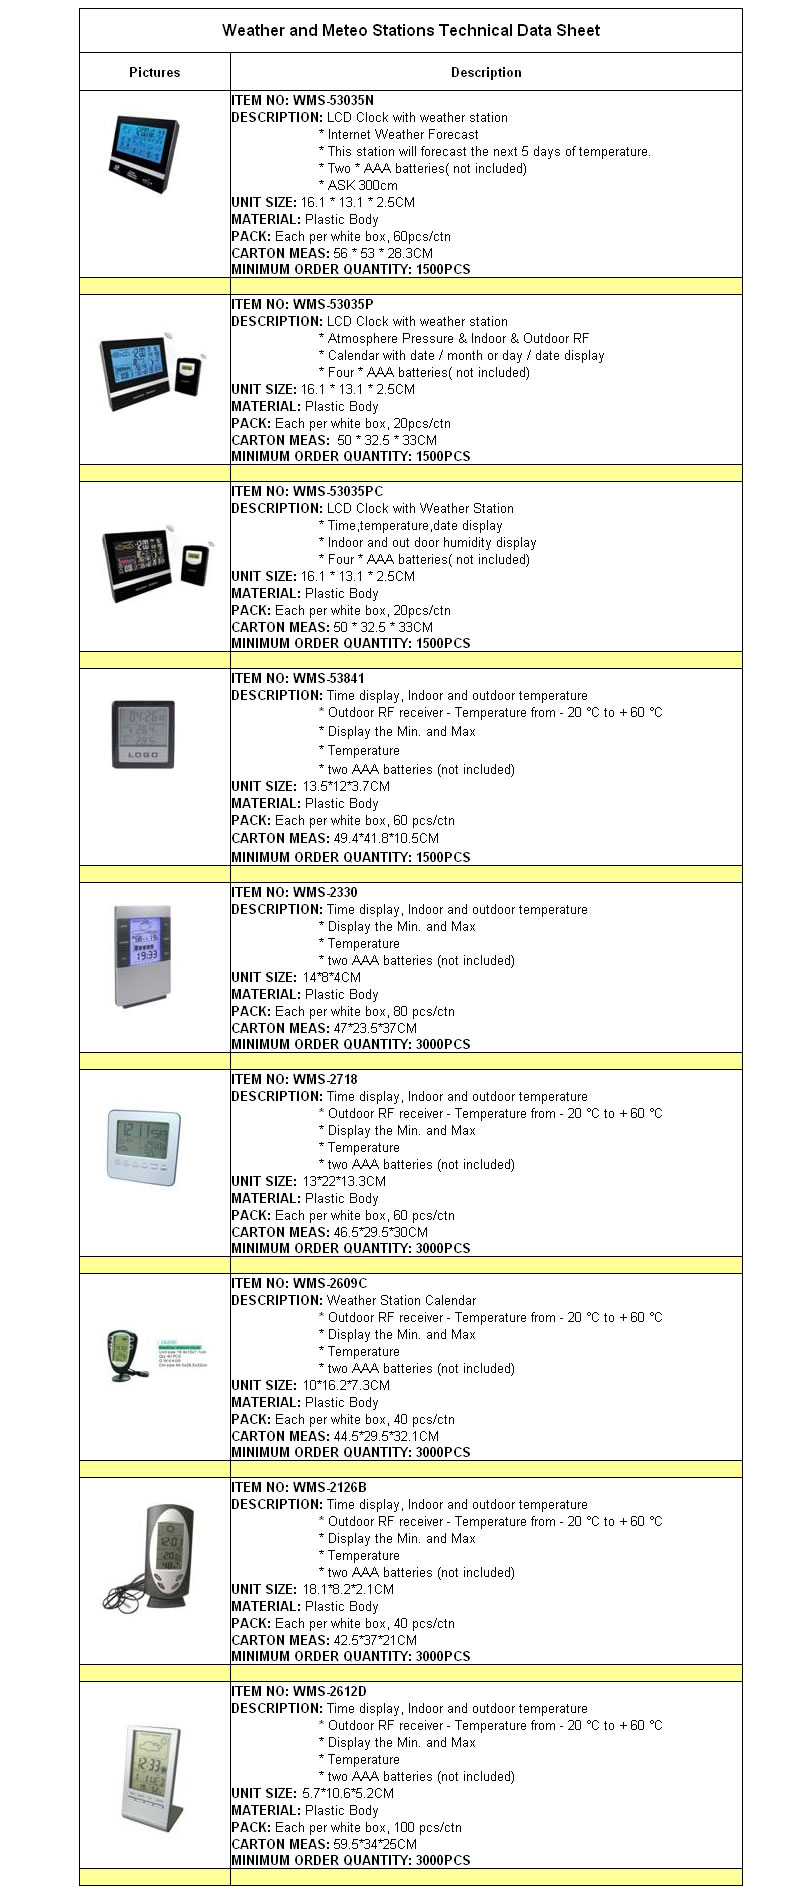 Weather and Meteo Stations Technical Data Sheet